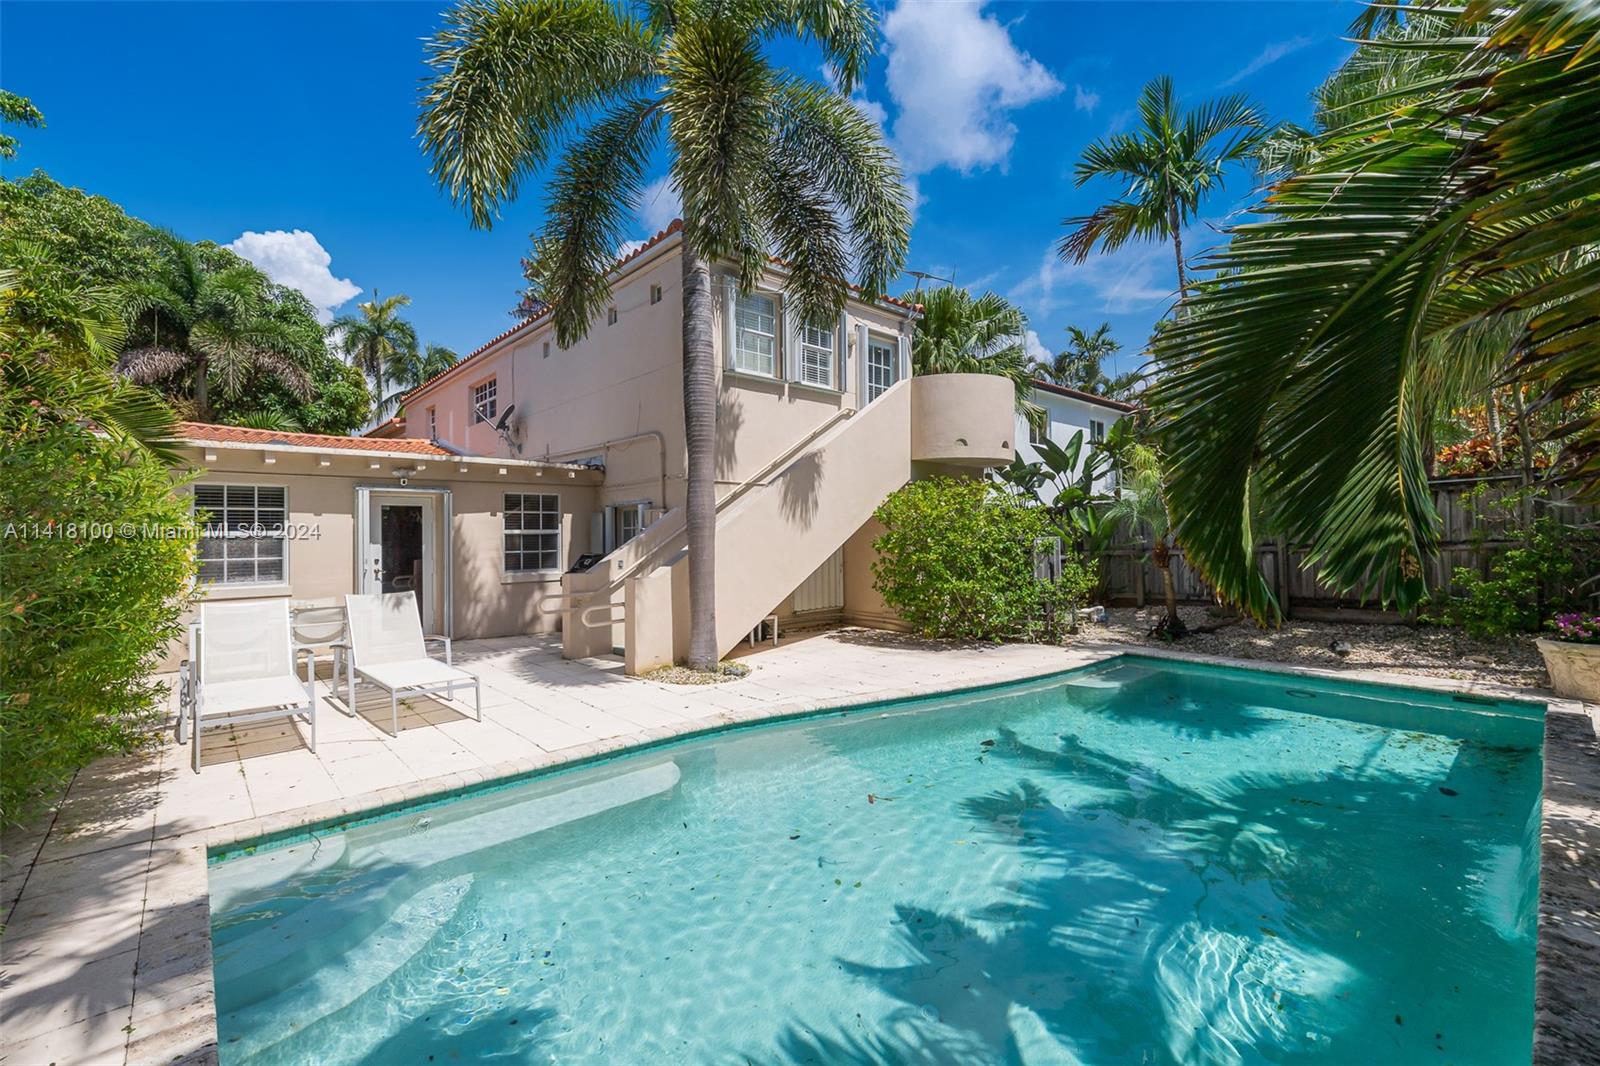 This spacious updated Miami Beach home with historic charm has 3,305 Sqft. under air. Enter through a tranquil butterfly garden & feel at peace.  Sprawling floor plan with lots of natural light with skylights has four bedrooms and four bathrooms. Vaulted ceilings with exposed original beams centered around a beautiful fireplace in the large formal dining room. Remodeled eat in kitchen with island. The private owners suite with renovated ensuite has an attached bonus room area with a private entrance. Ample closet and storage space. Outdoor storage shed. Entertain in this private backyard oasis with a newly resurfaced pool. Multiple zone, energy efficient A/C systems. Never lose power. Full home natural gas generator. Car charging station. Minutes to all that Miami Beach has to offer.